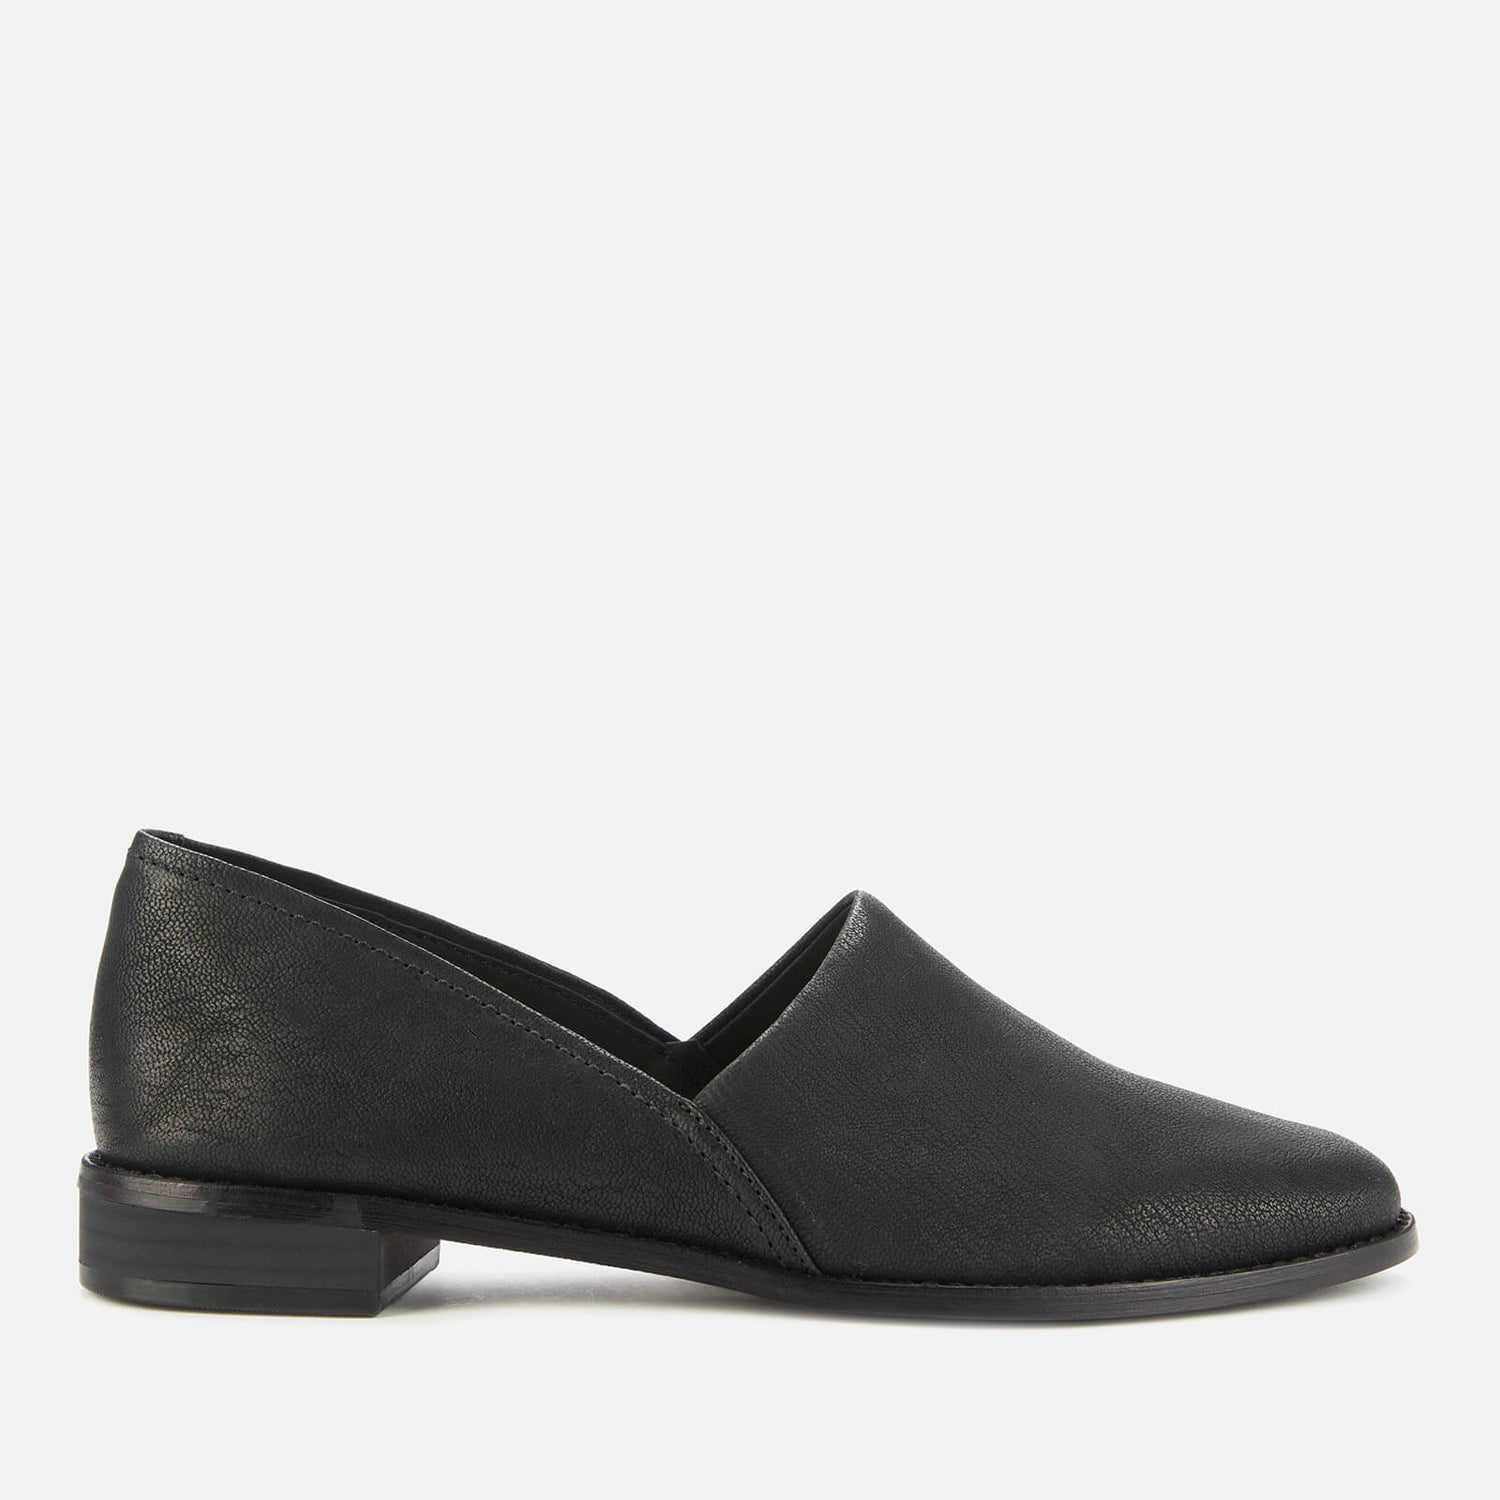 Clarks Women's Pure Easy Leather Flats - Black - UK 3